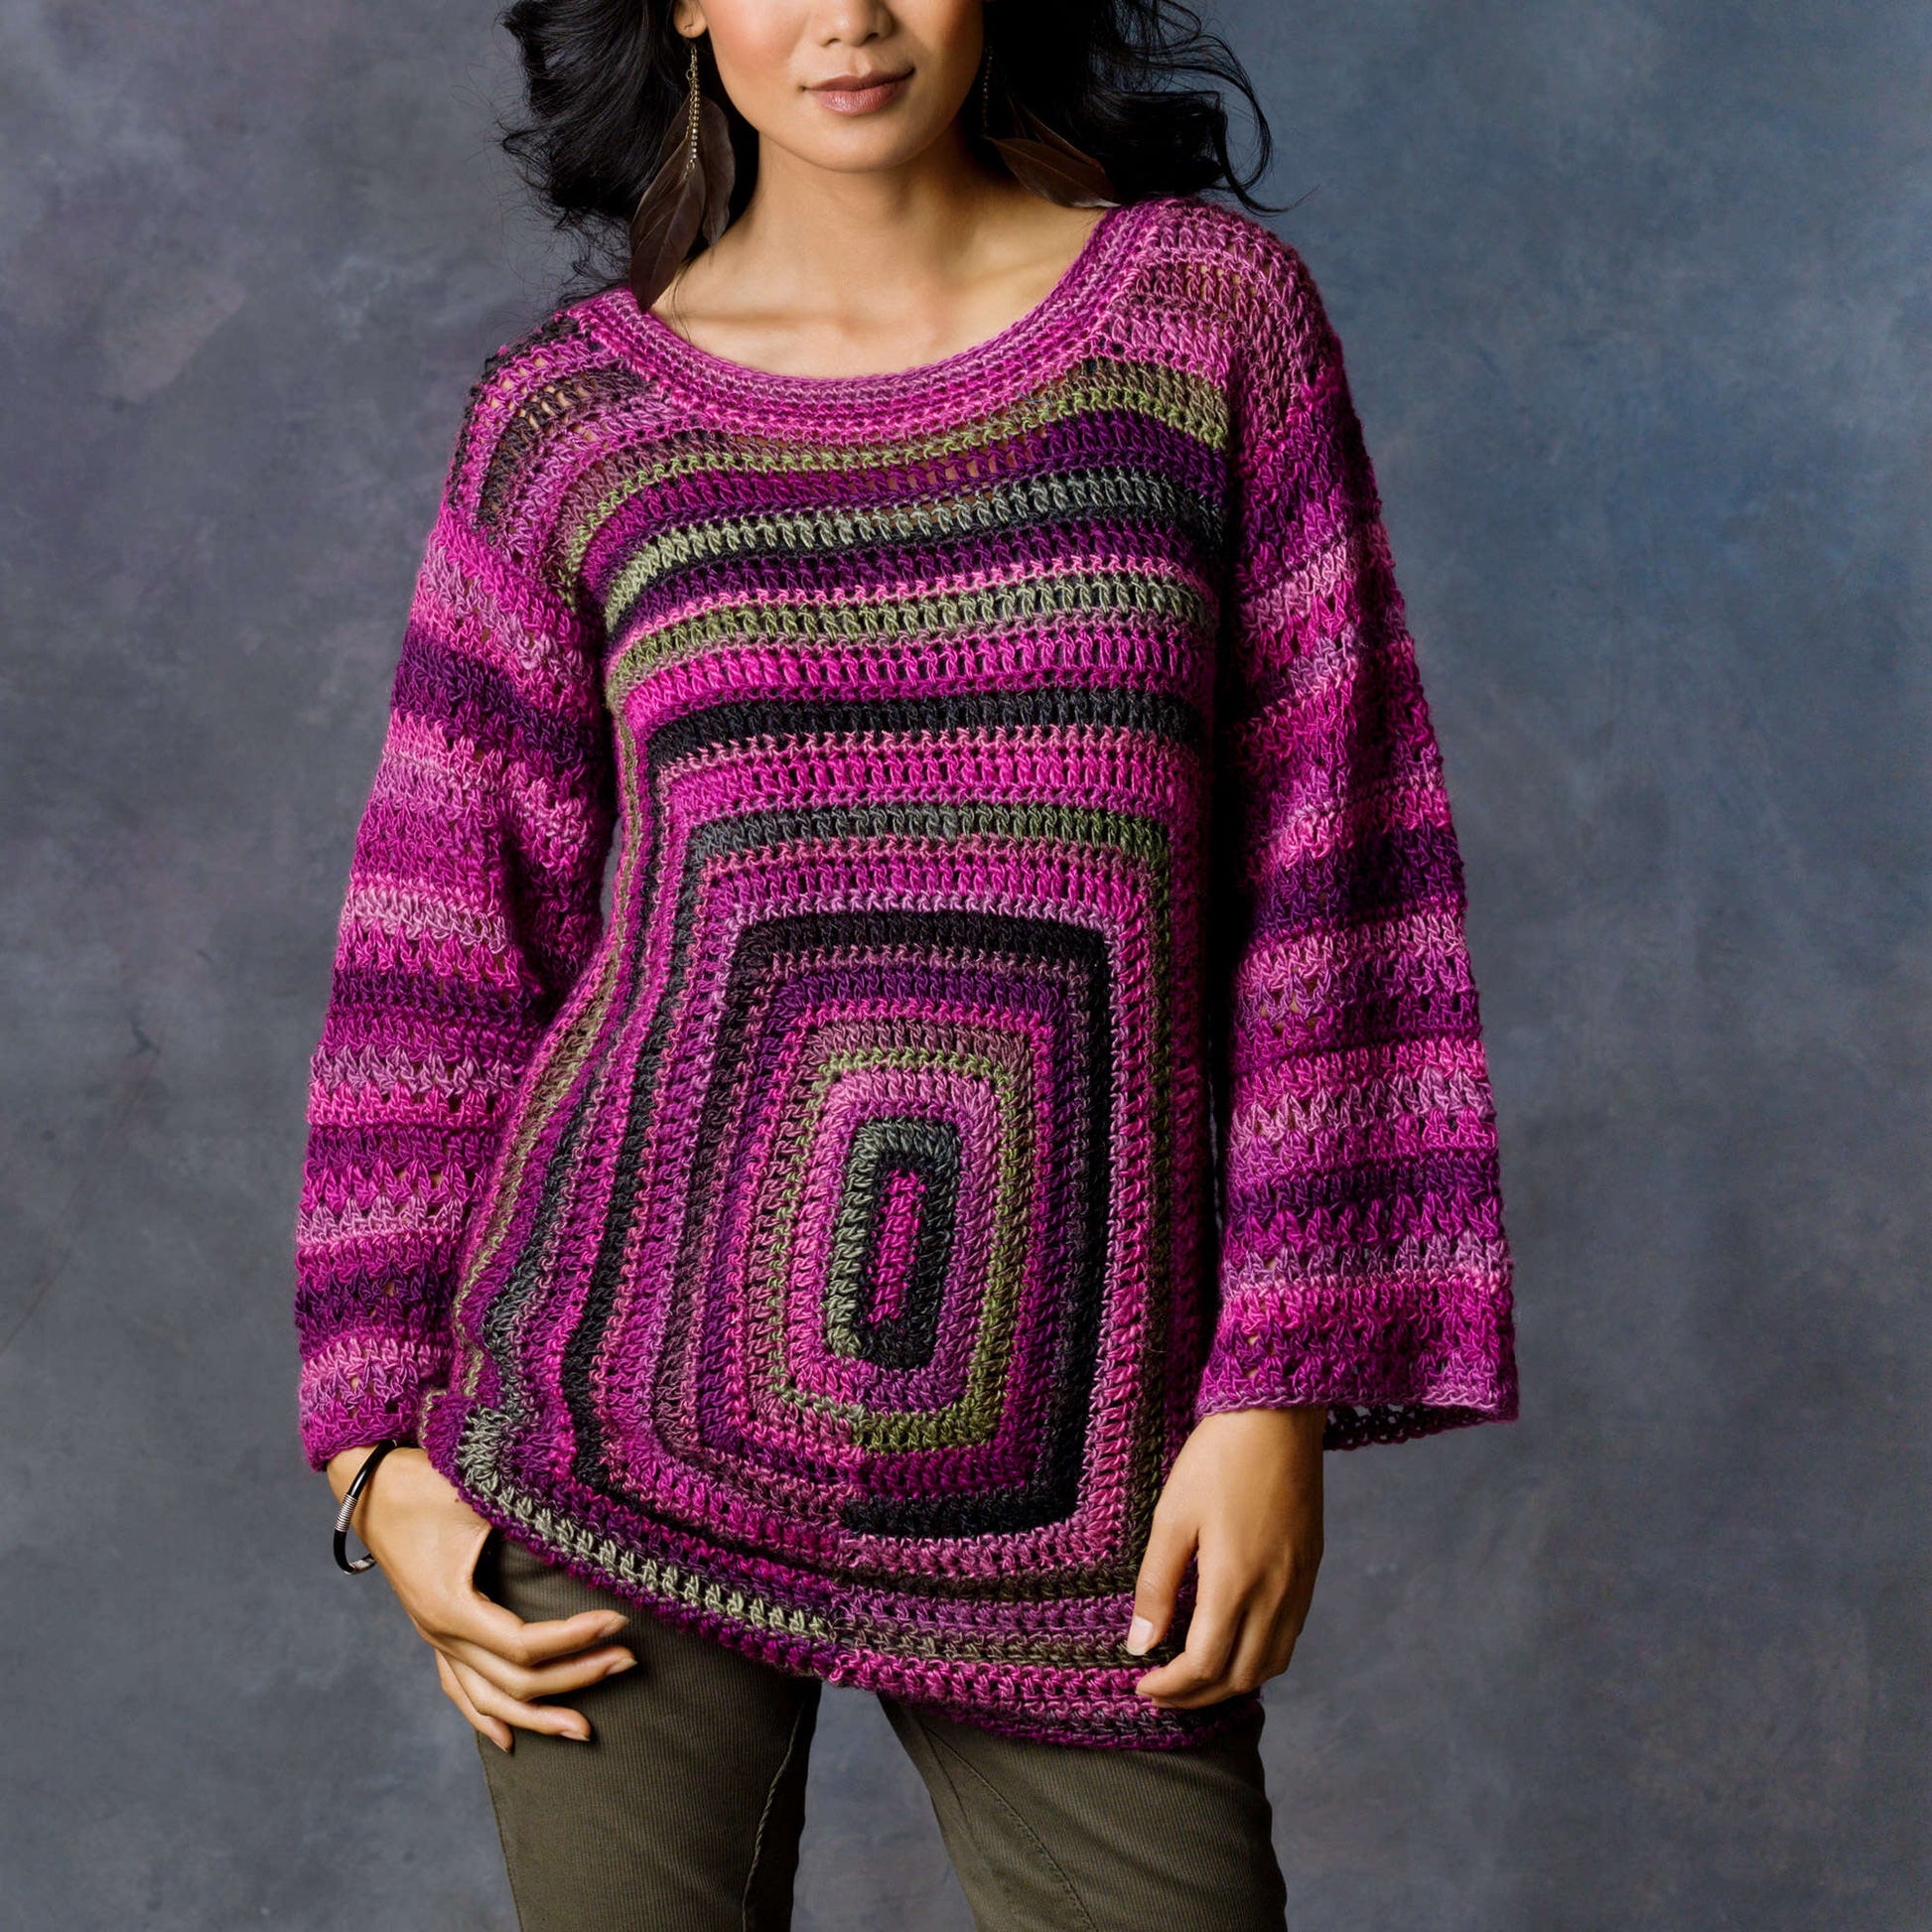 Free Red Heart Crochet Square Deal Sweater Pattern